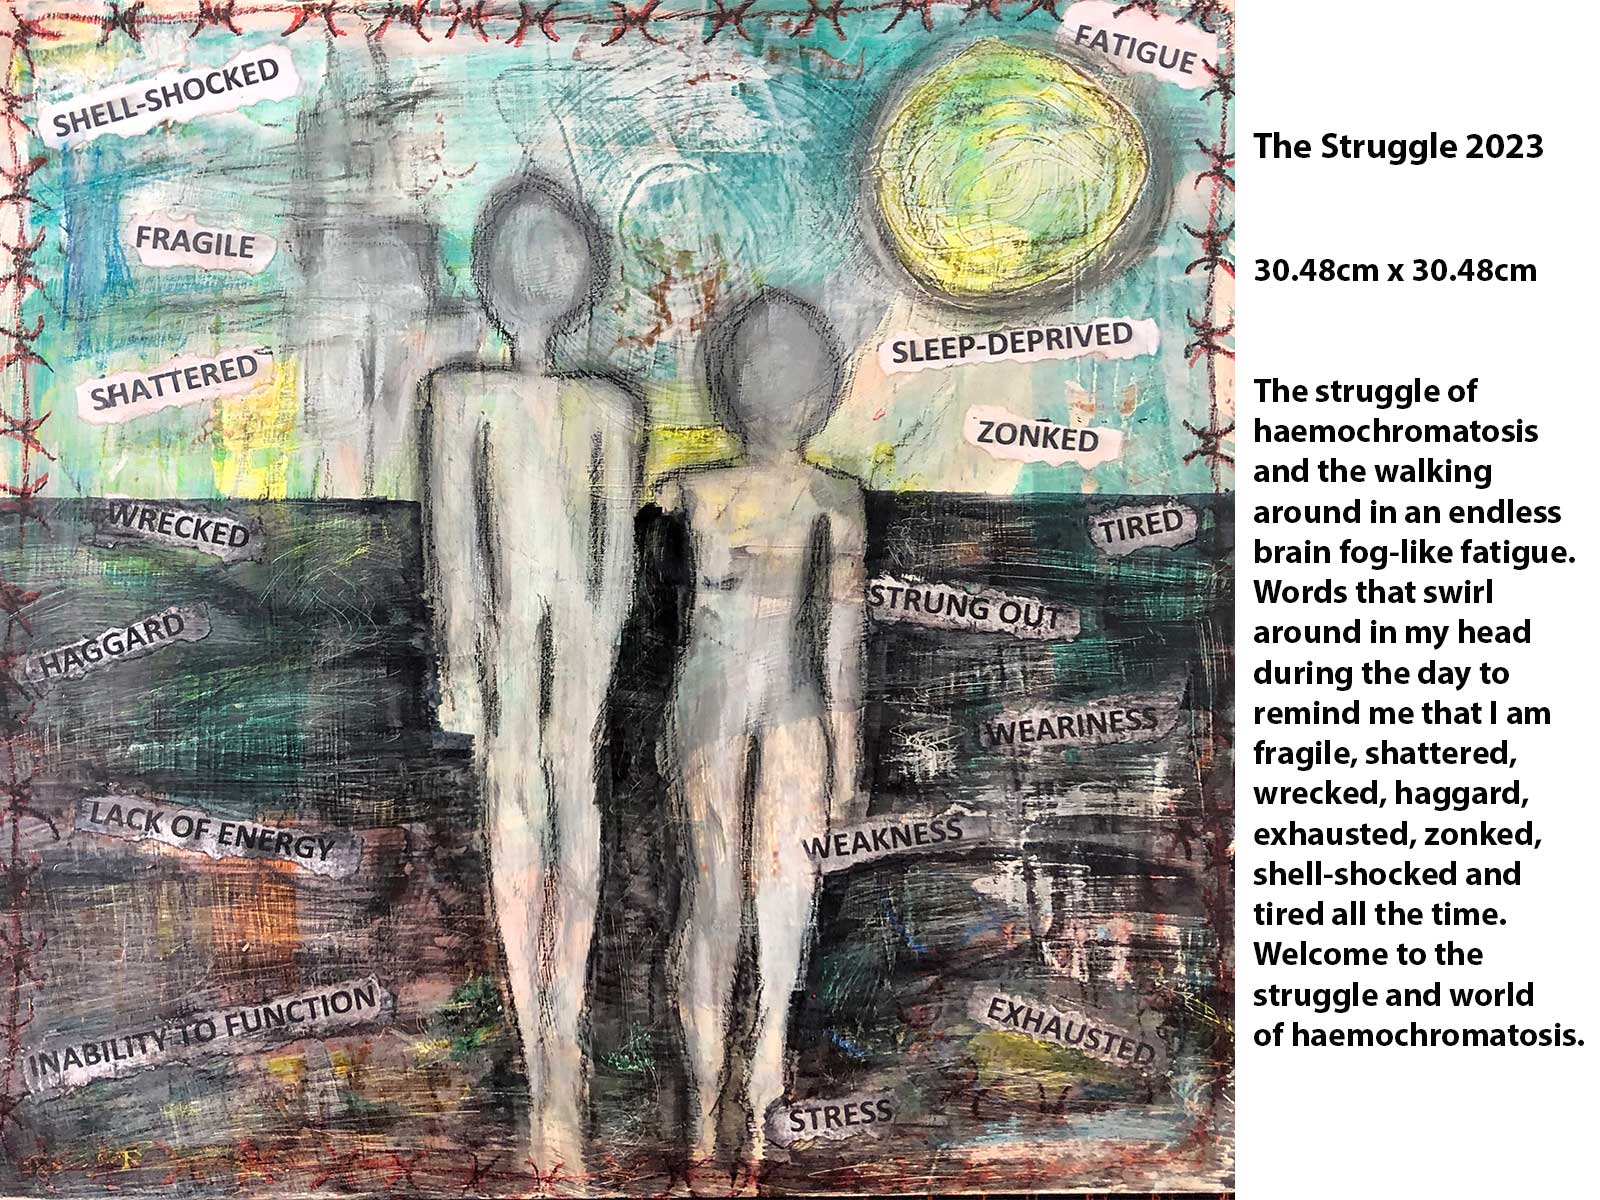 Struggle by Ann Williams-Fitzgerald in her Artist Profile with Art Trails Tasmania